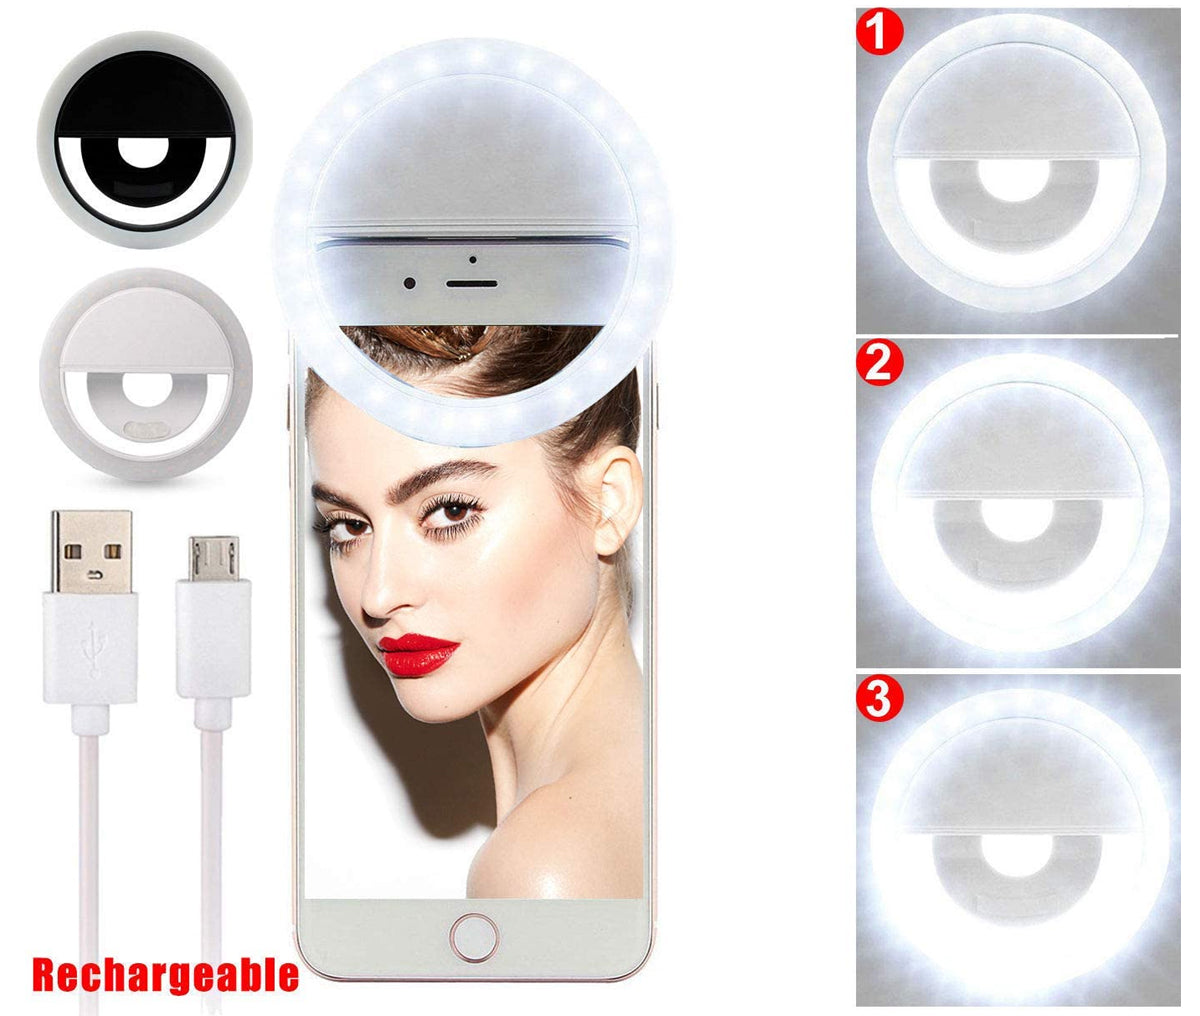 Rechargeable Selfie Ring Light - Perfect for Vlogging, Live Streaming, and Taking Selfies